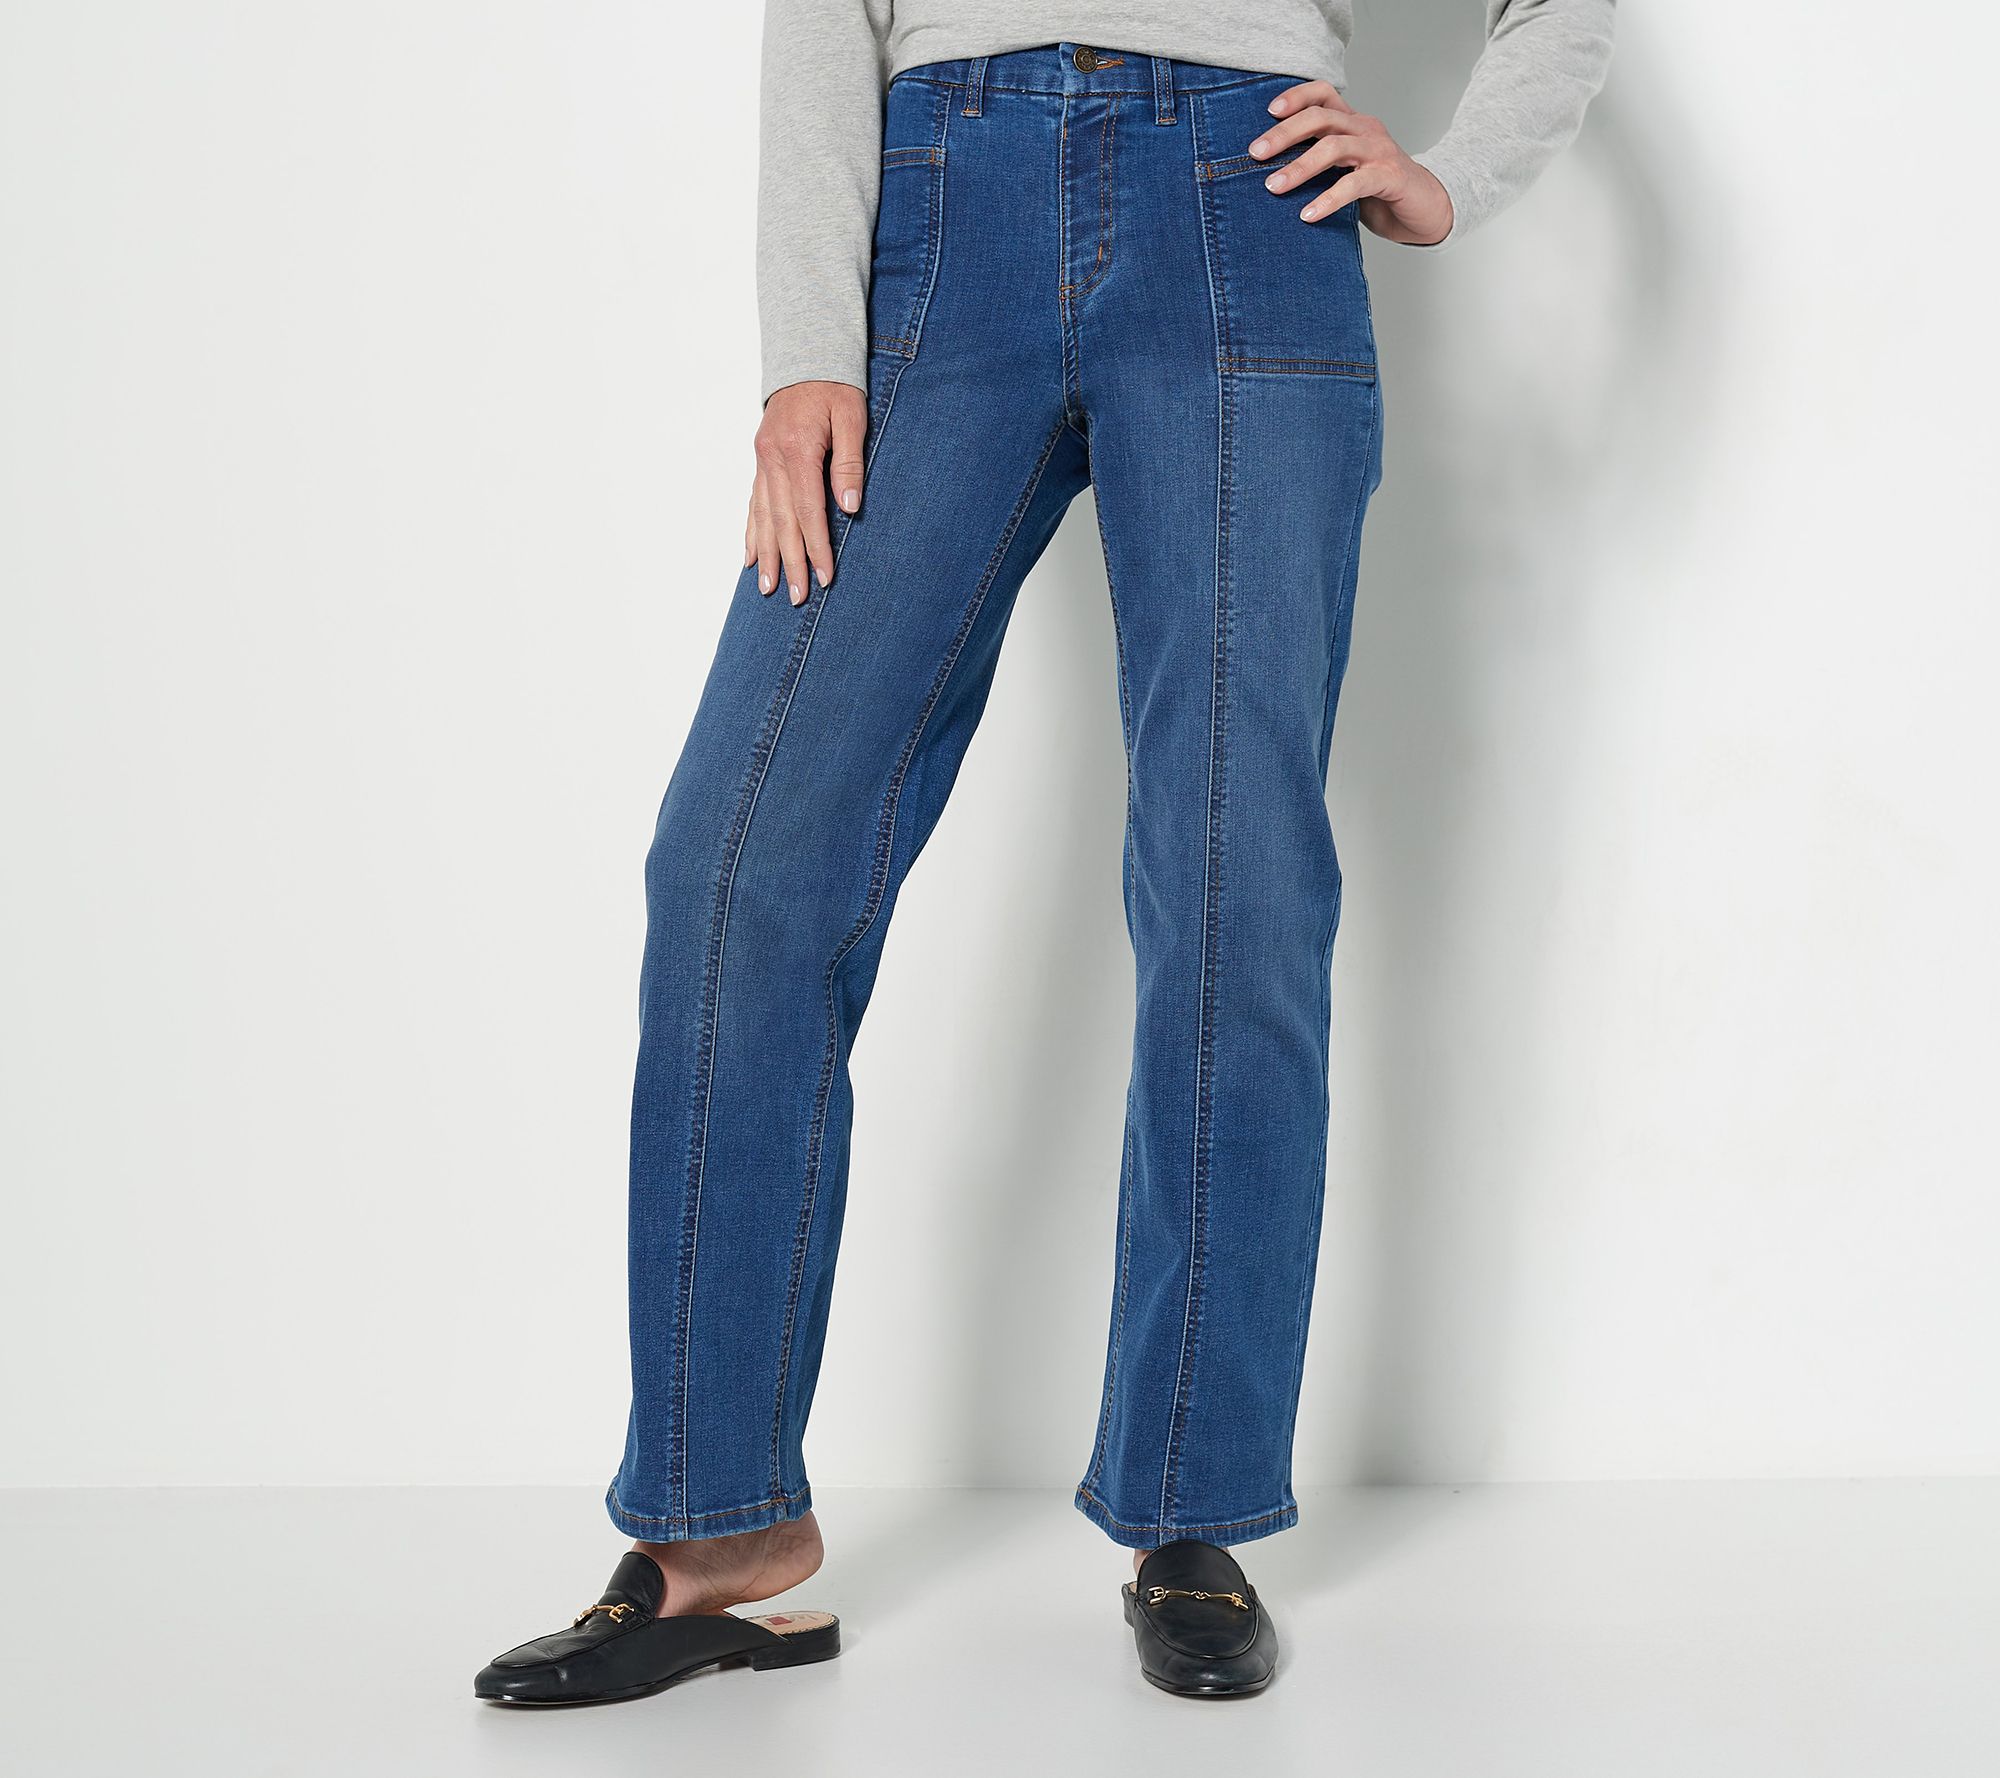 High Waisted Denim Ladies Jeans Pant For Girls Wide Leg, Elastic, And  Stylish Available In Sizes 10 12 Years LJ201203 From Cong05, $18.28